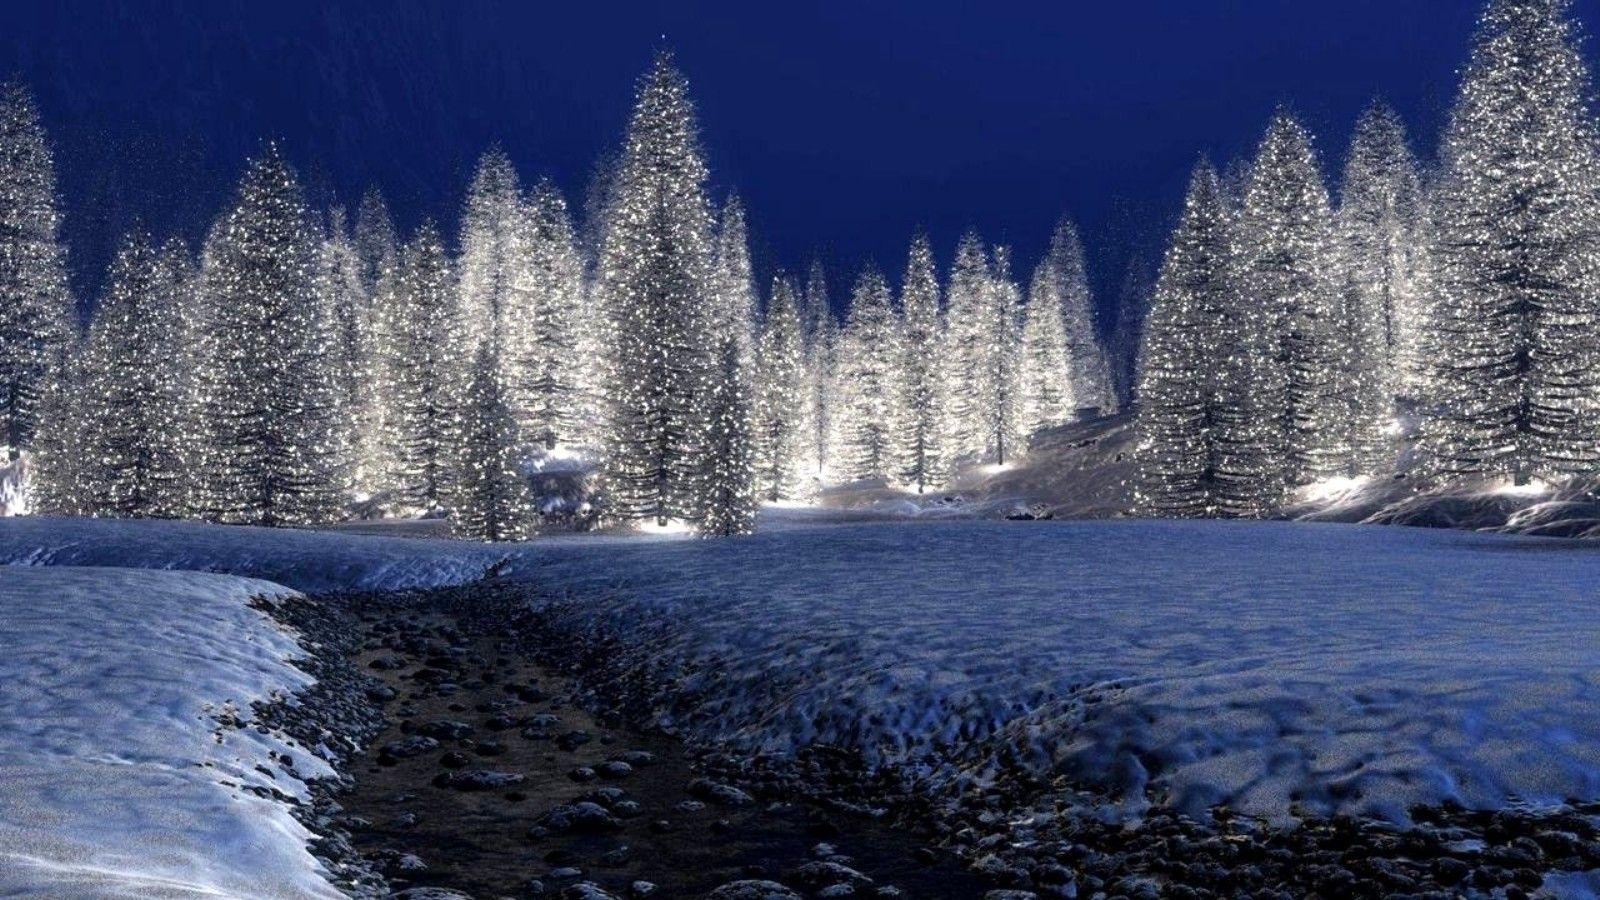 images of nighttime snow scenery